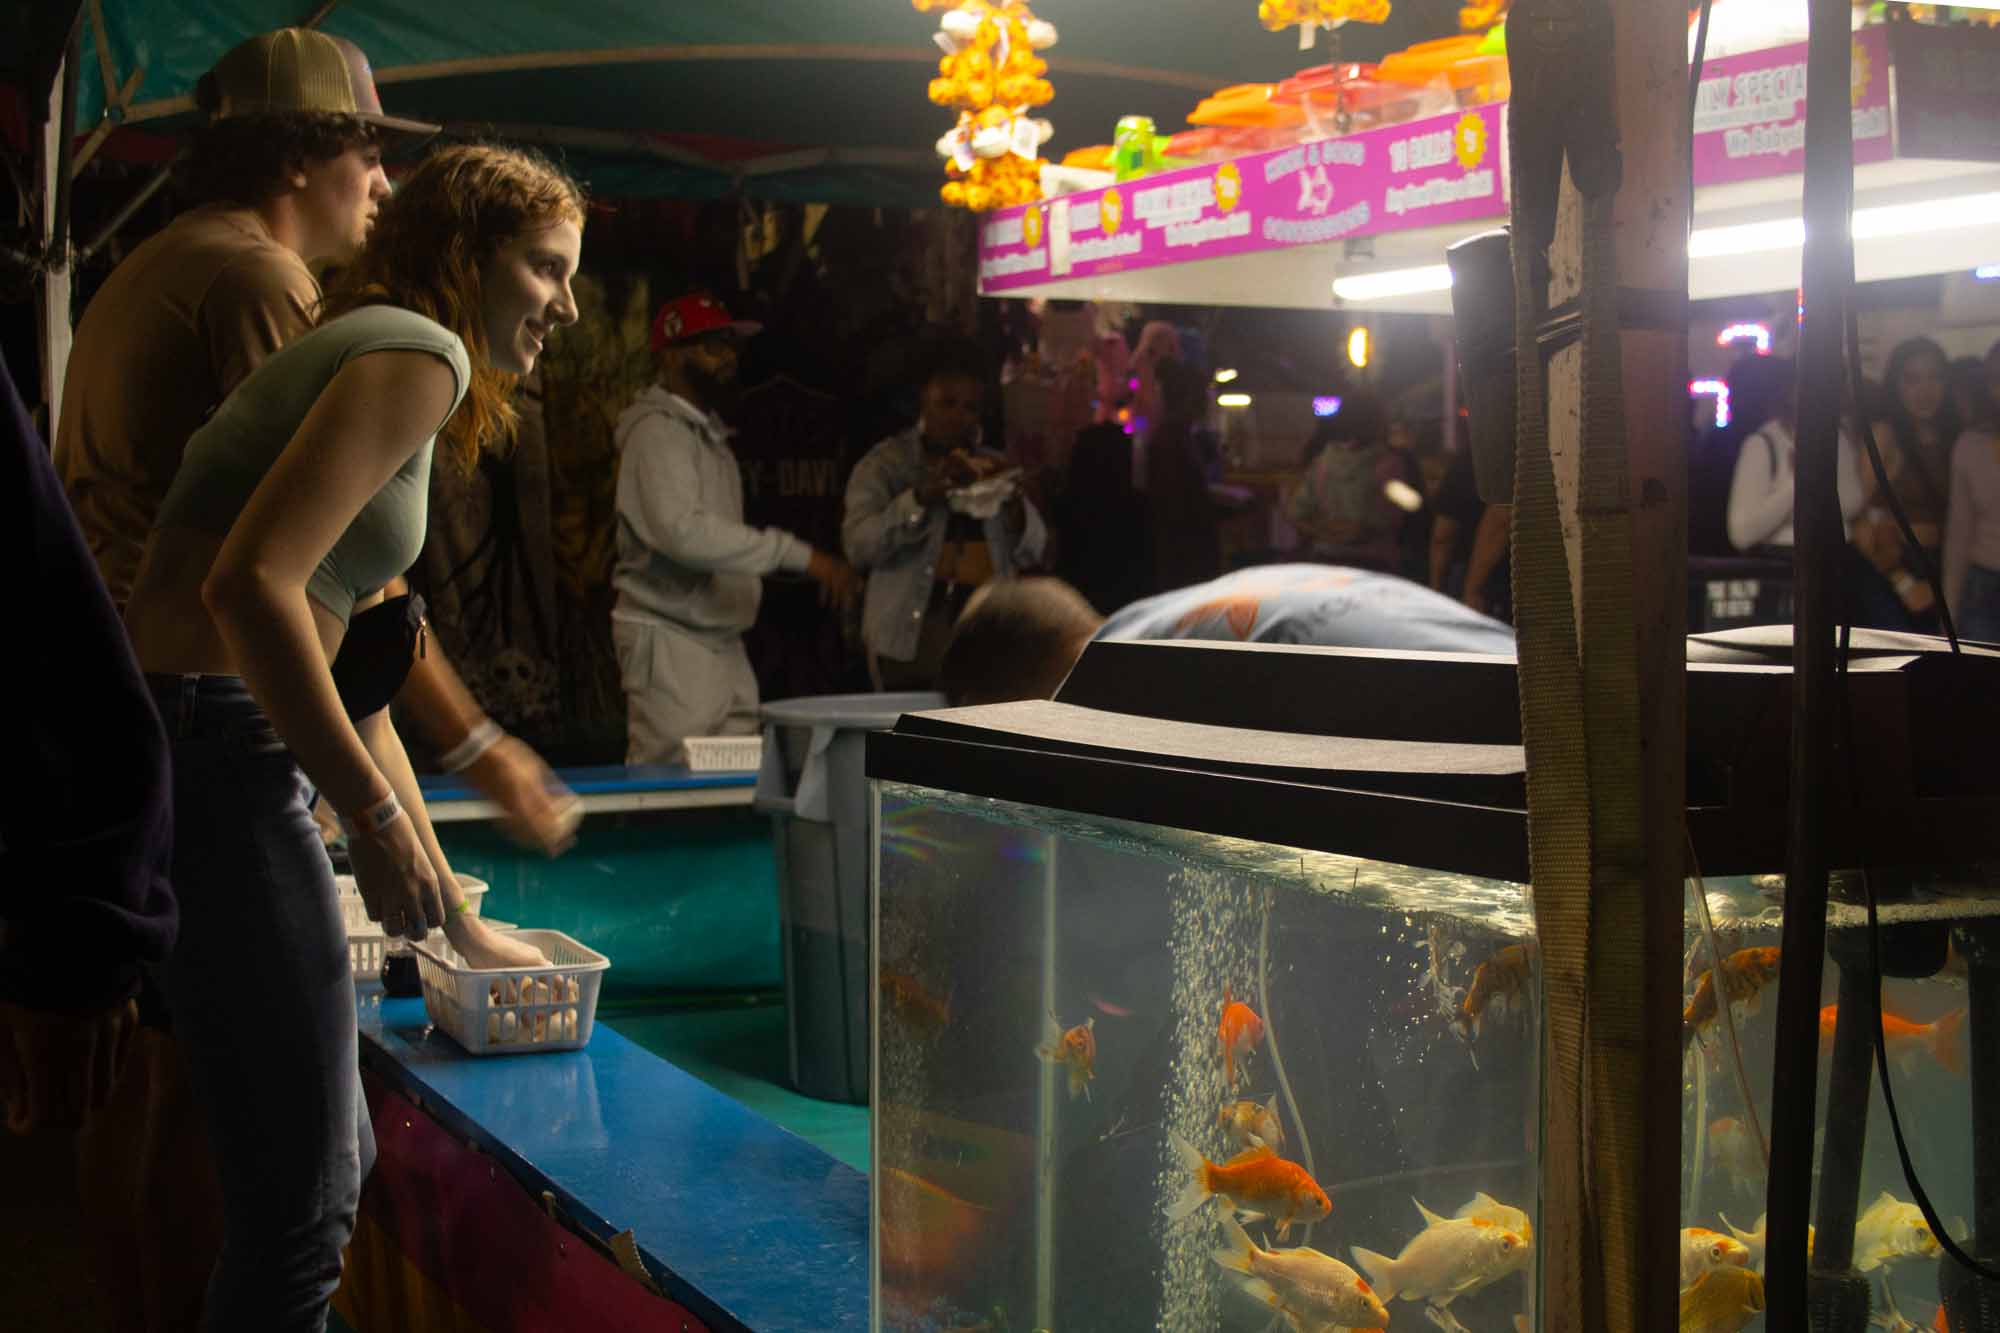 The Carolina Classic Fair attracts visitors from all over the state to eat fried foods and play carnival games. The couple photographed attempts to win a gold fish at the ring toss tent. The goal for the photoshoot was to capture a photo with great light and a portrait of someone, who experienced a life changing event.